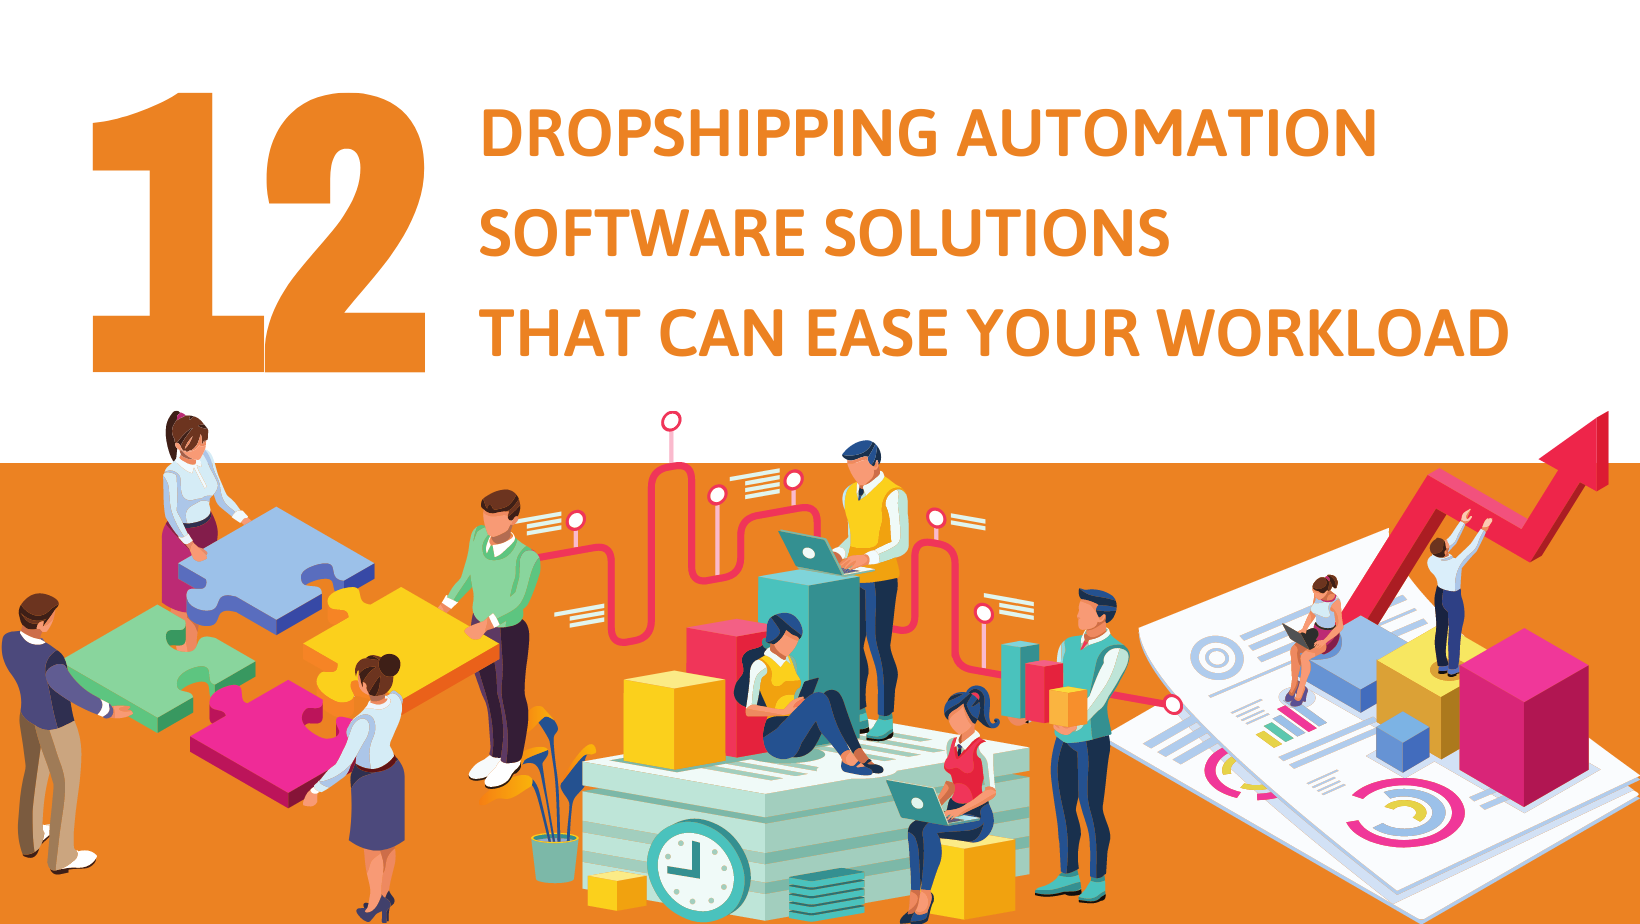 12 DROPSHIPPING AUTOMATION SOFTWARE SOLUTIONS THAT CAN EASE YOUR WORKLOAD